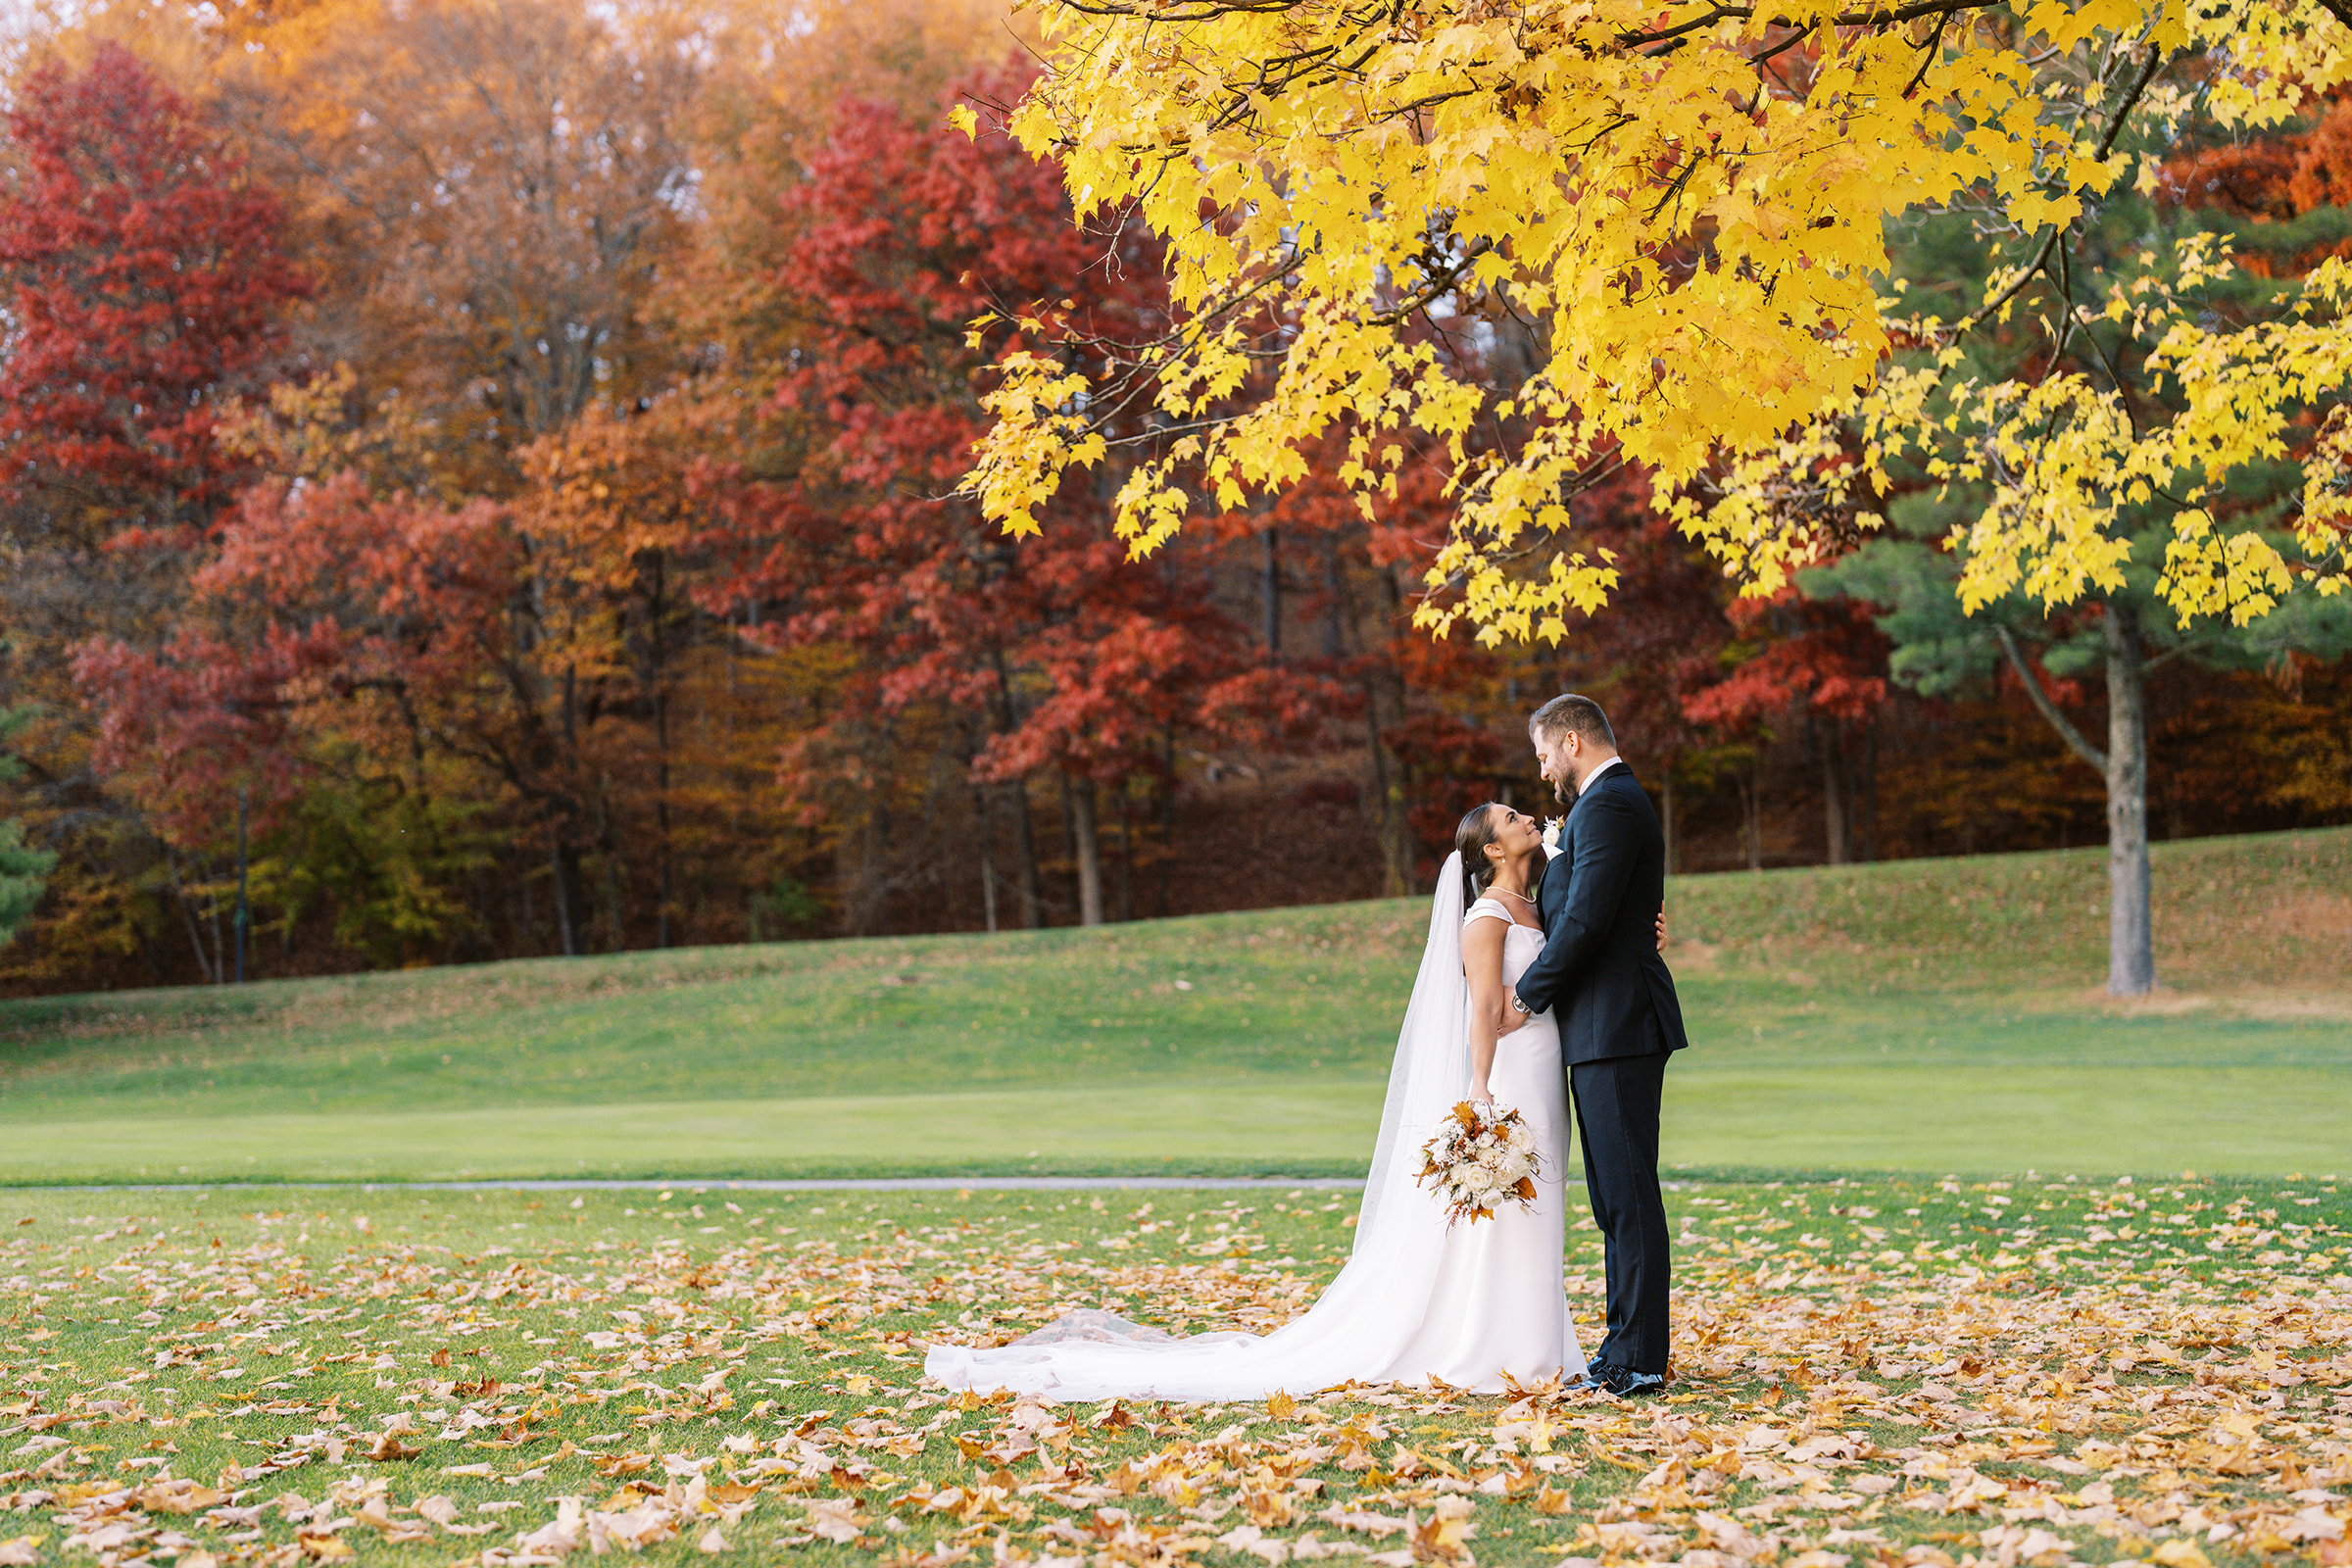 A couple just married, embracing in front of vibrant autumn leaves at thes at their wedding at Hunt Valley Country Club.